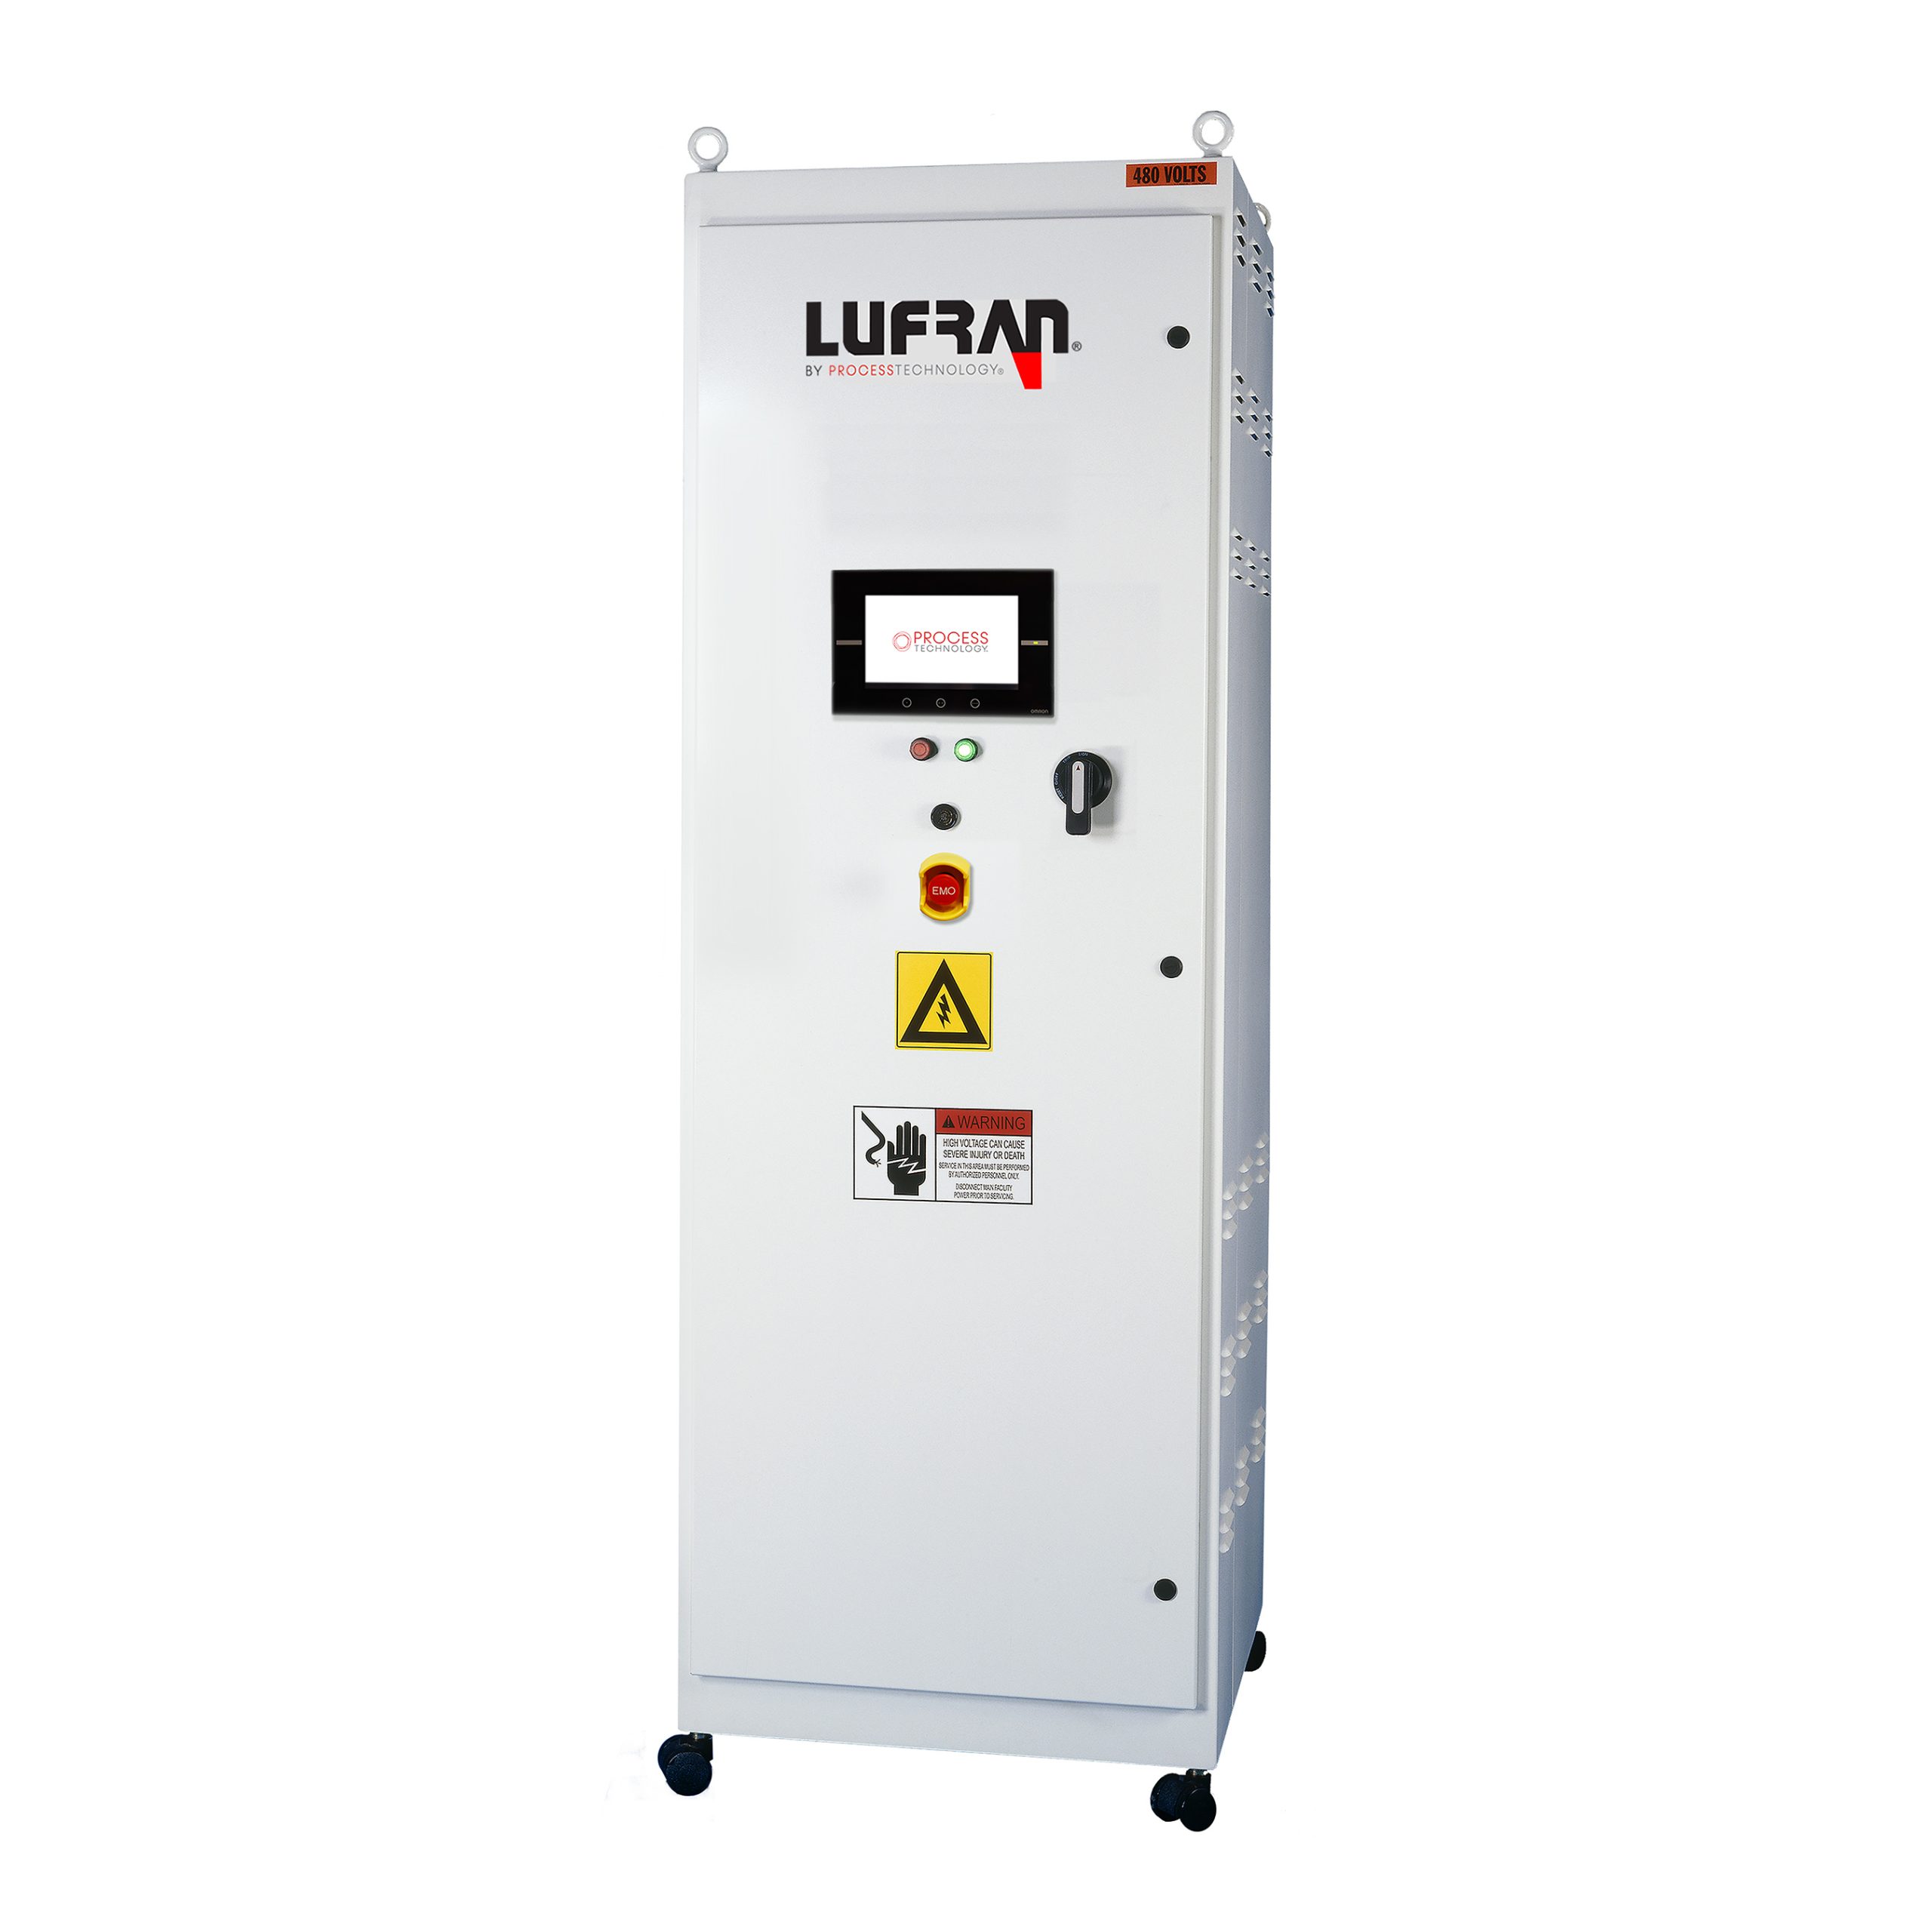 Lufran Chemical Heater | Chemical Immersion Heater & Inline Chemical Heater